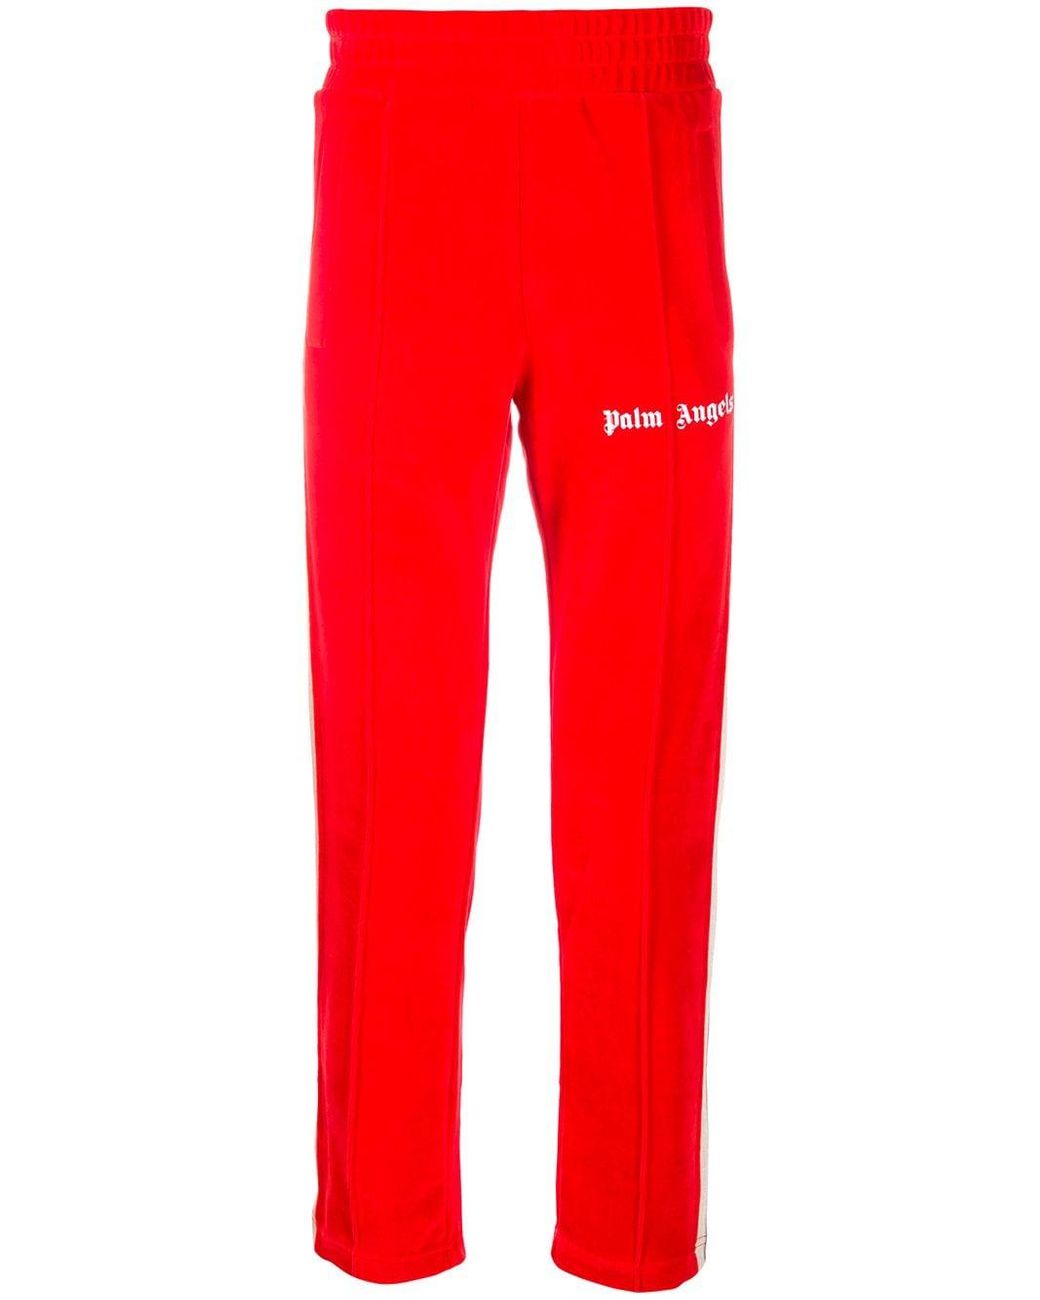 Palm Angels Cotton Logo Print Track Pants in Red for Men - Lyst